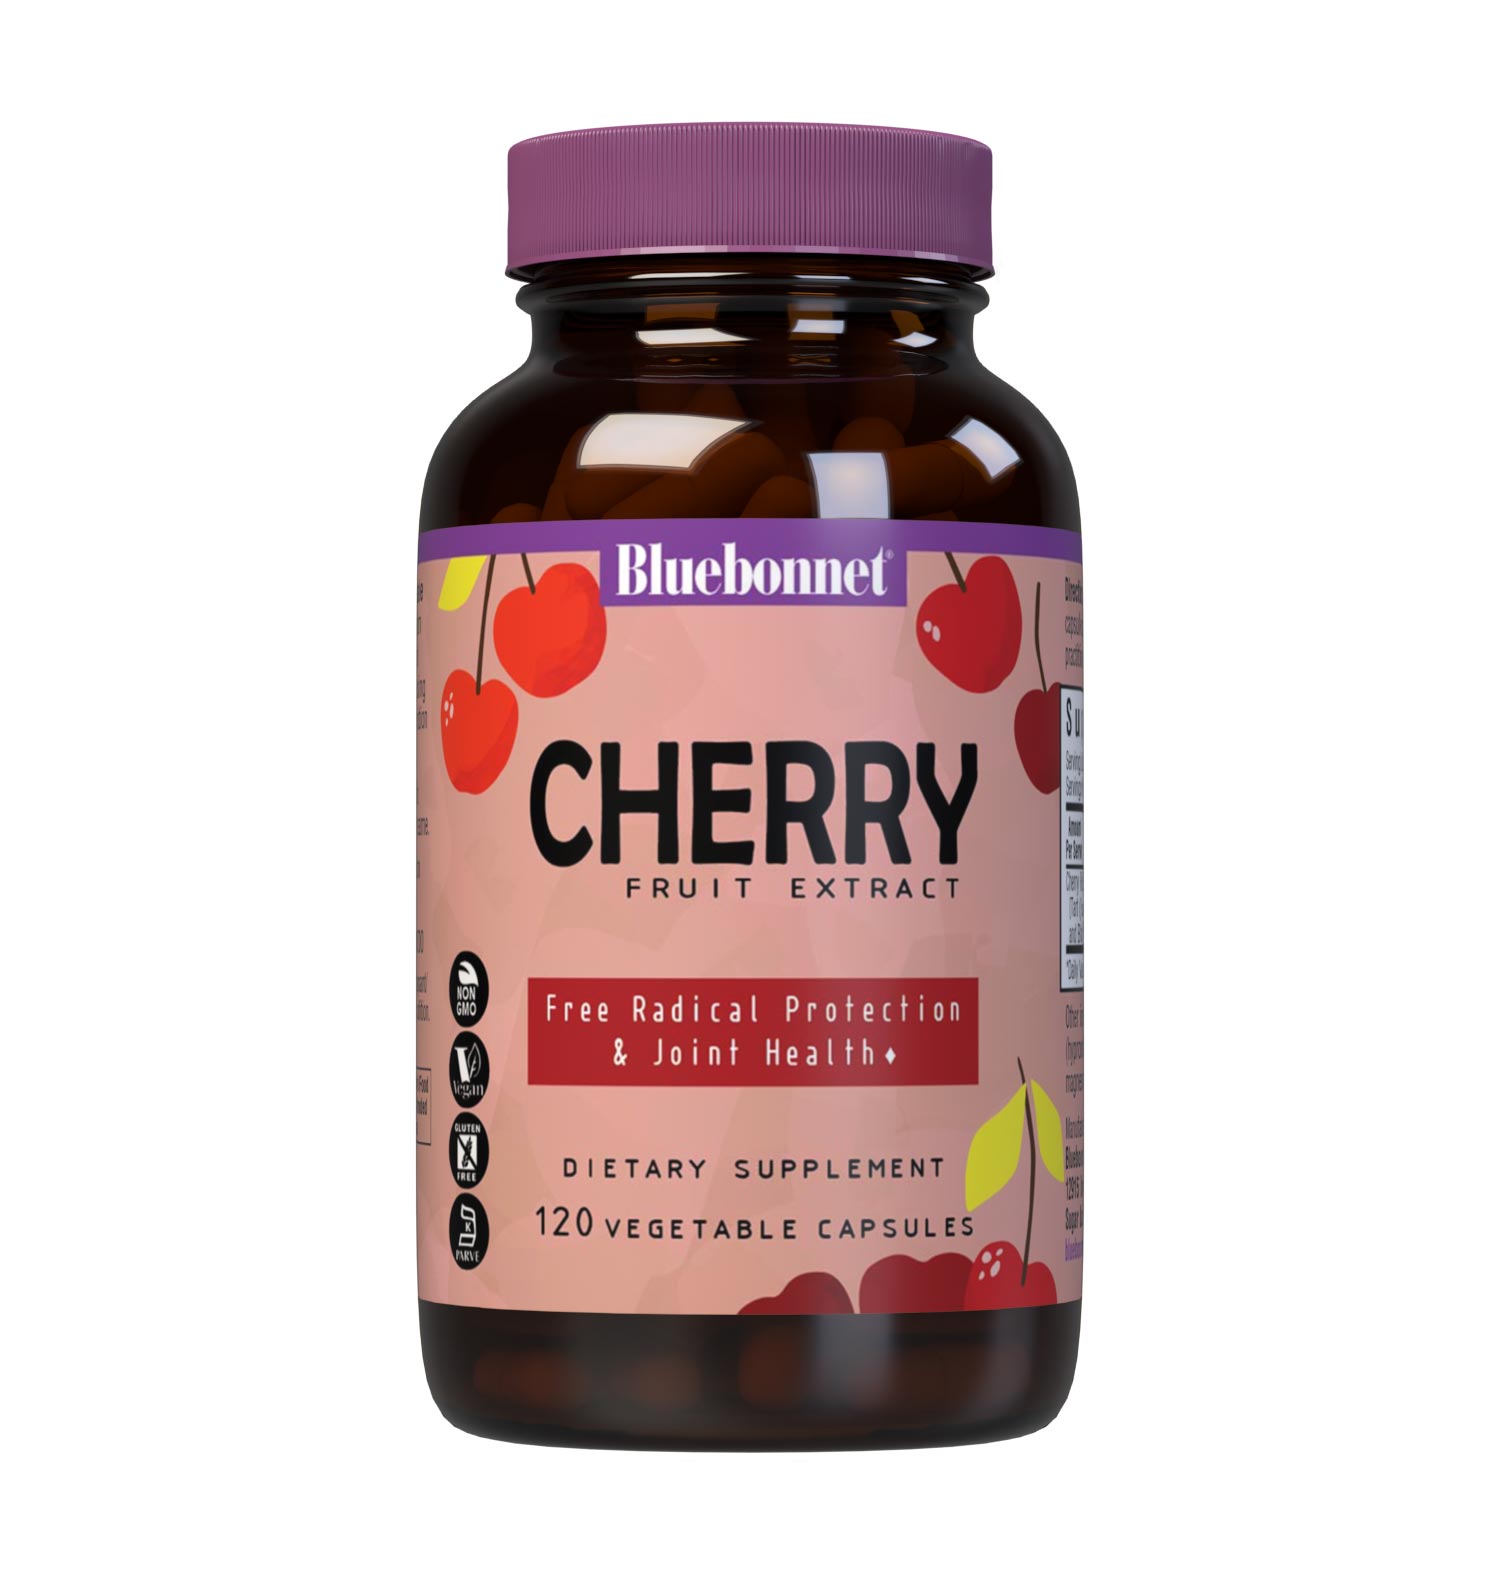 Bluebonnet's Cherry Fruit Extract 120 Vegetable Capsules are formulated with a combination of tart, sweet and black cherry to provide free radical protection and support joint health. #size_120 count